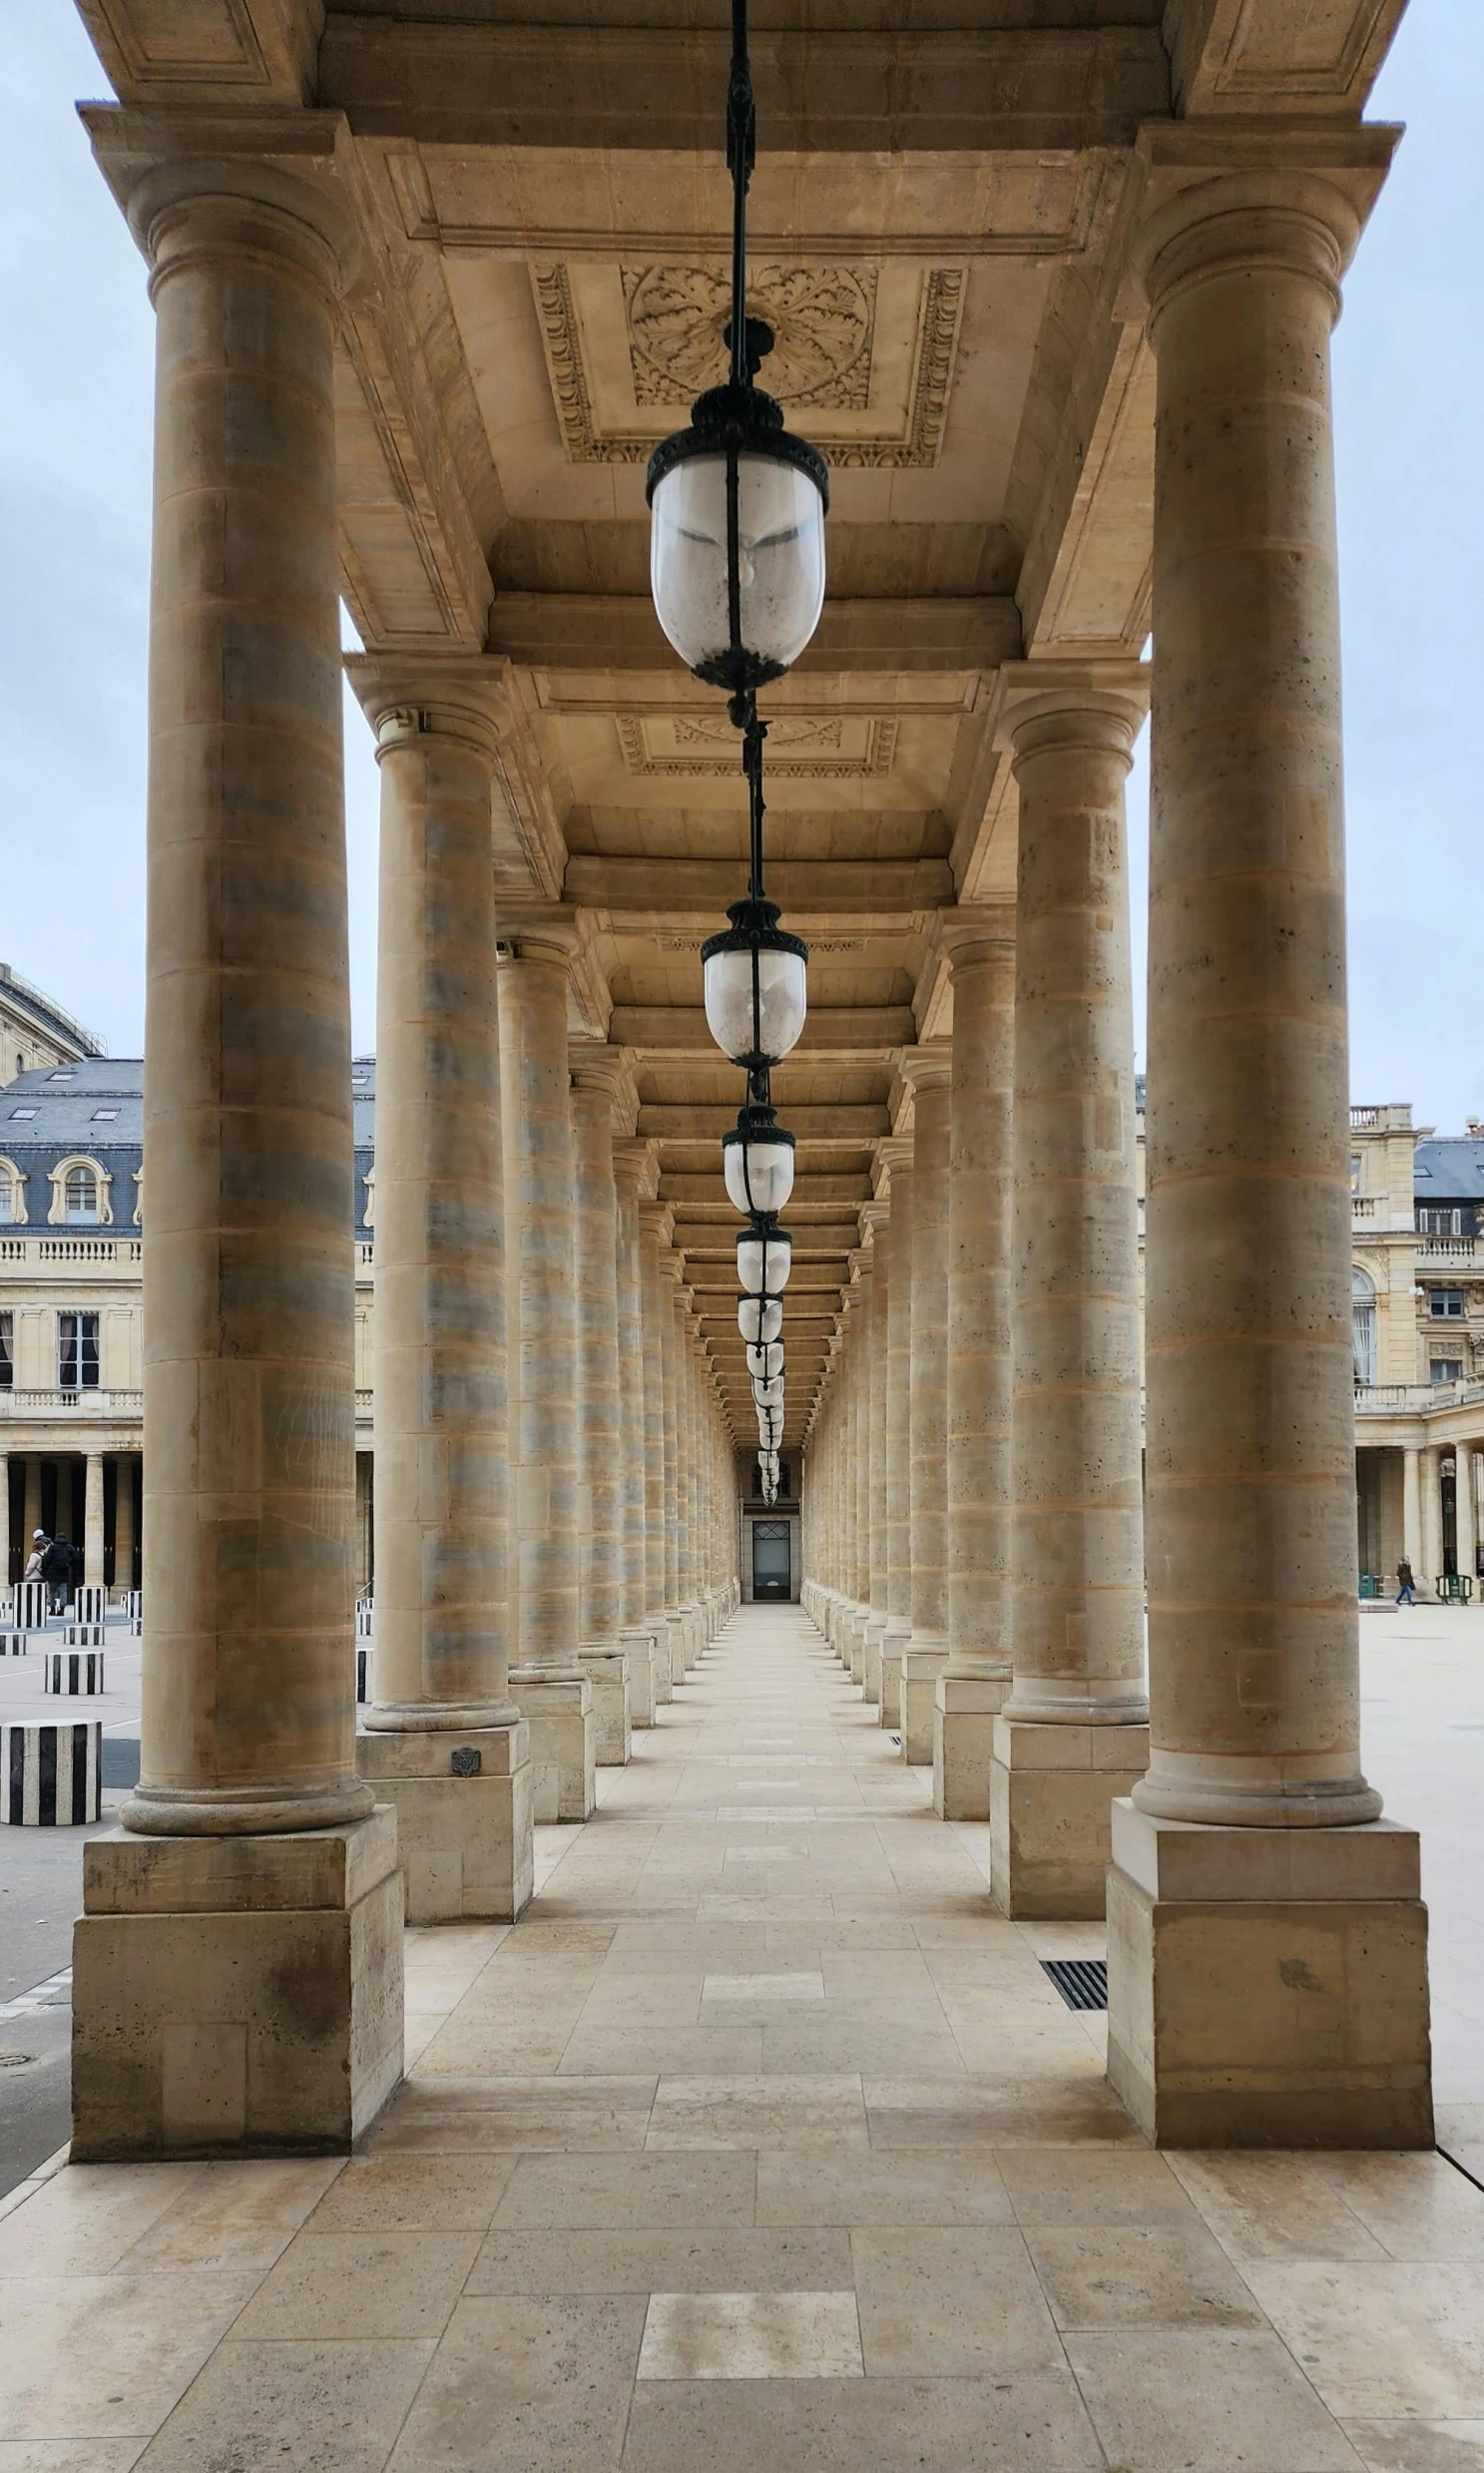 a sidewalk with large columns and lantern lights on the sides